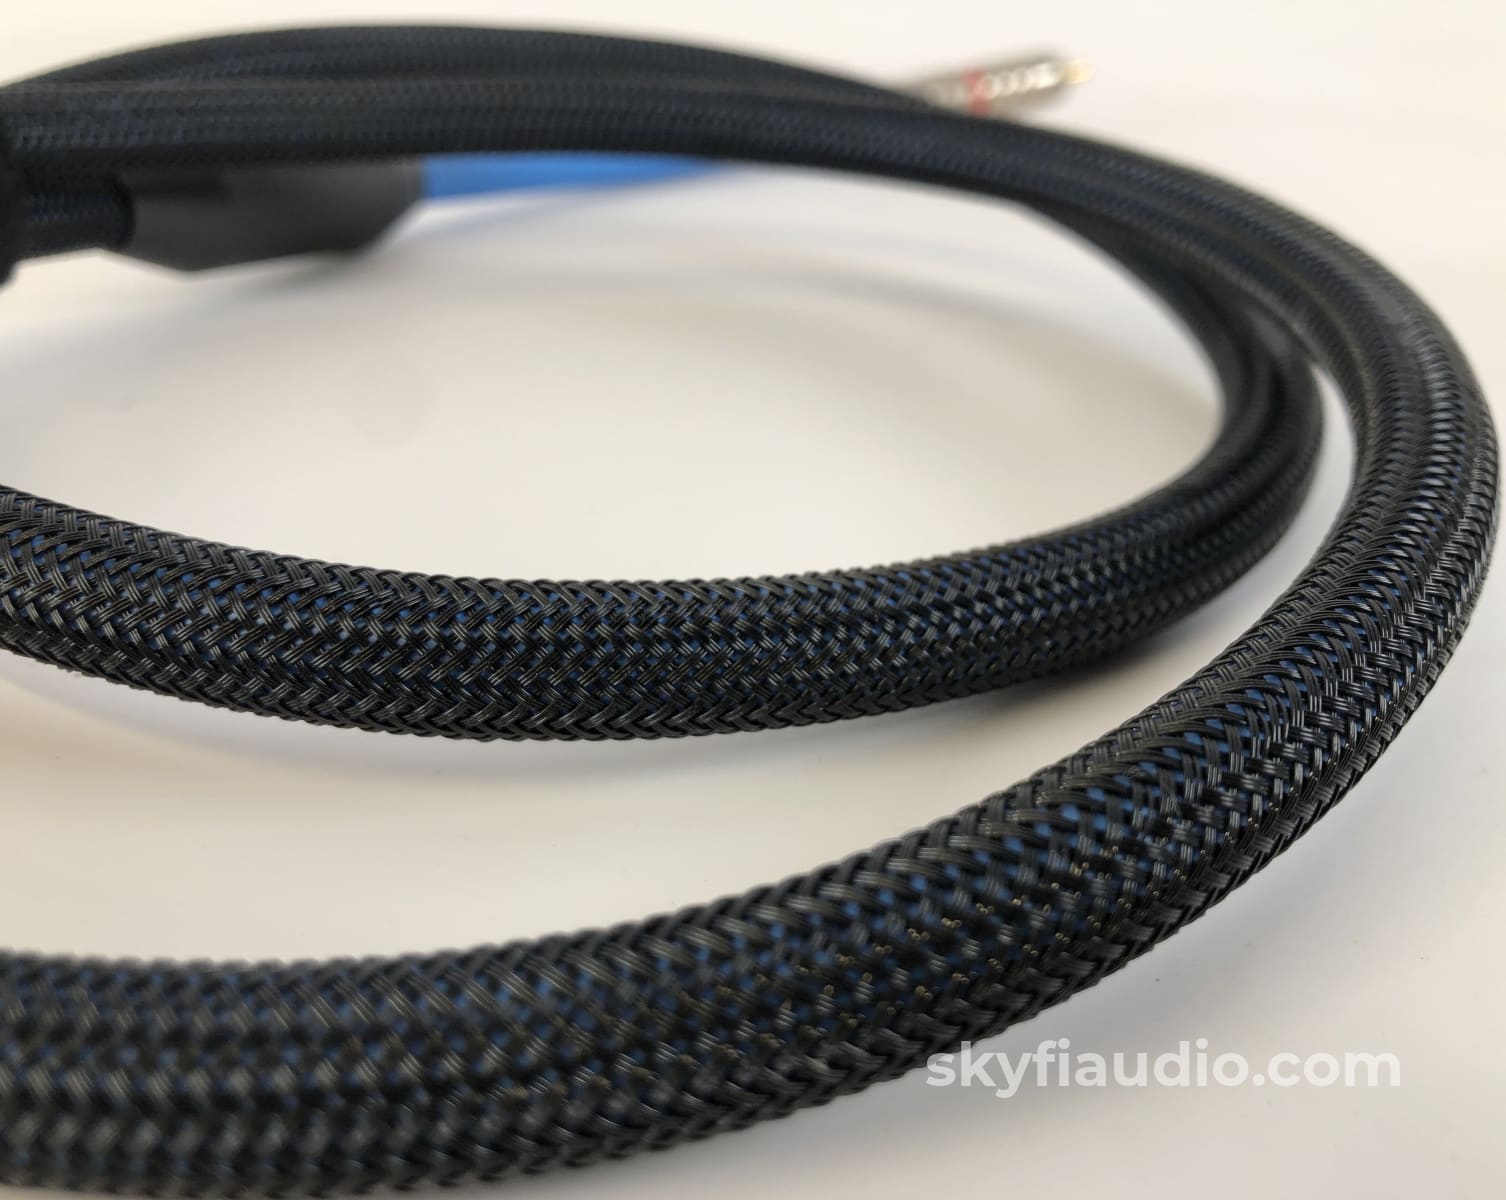 Siltech Cables - Hf-9 G3 Coaxial Digital Audio Cable 5